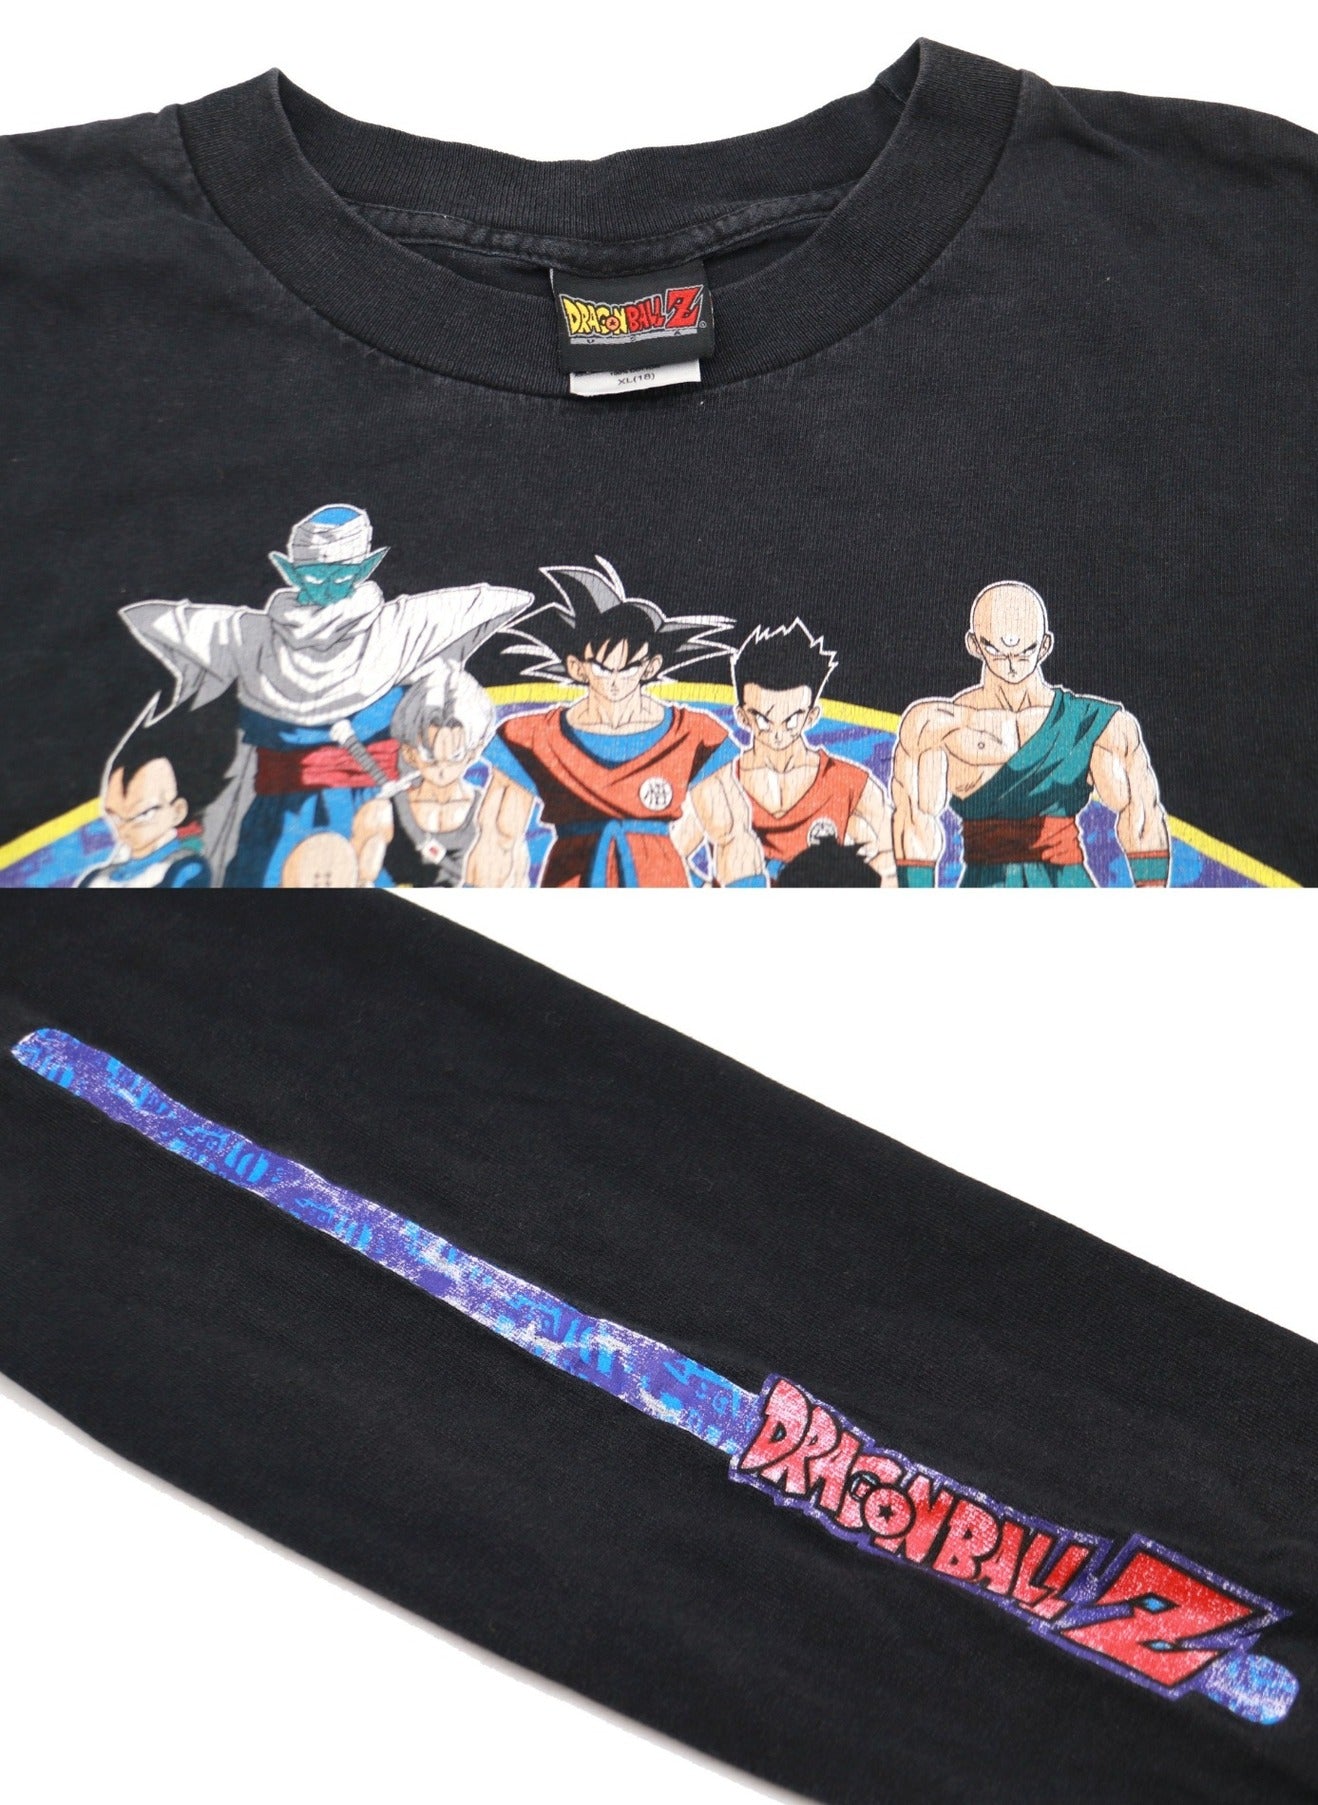 [Pre-owned] [Vintage Clothes] DRAGONBALL Z Long Sleeve T-Shirt Copyright 2000